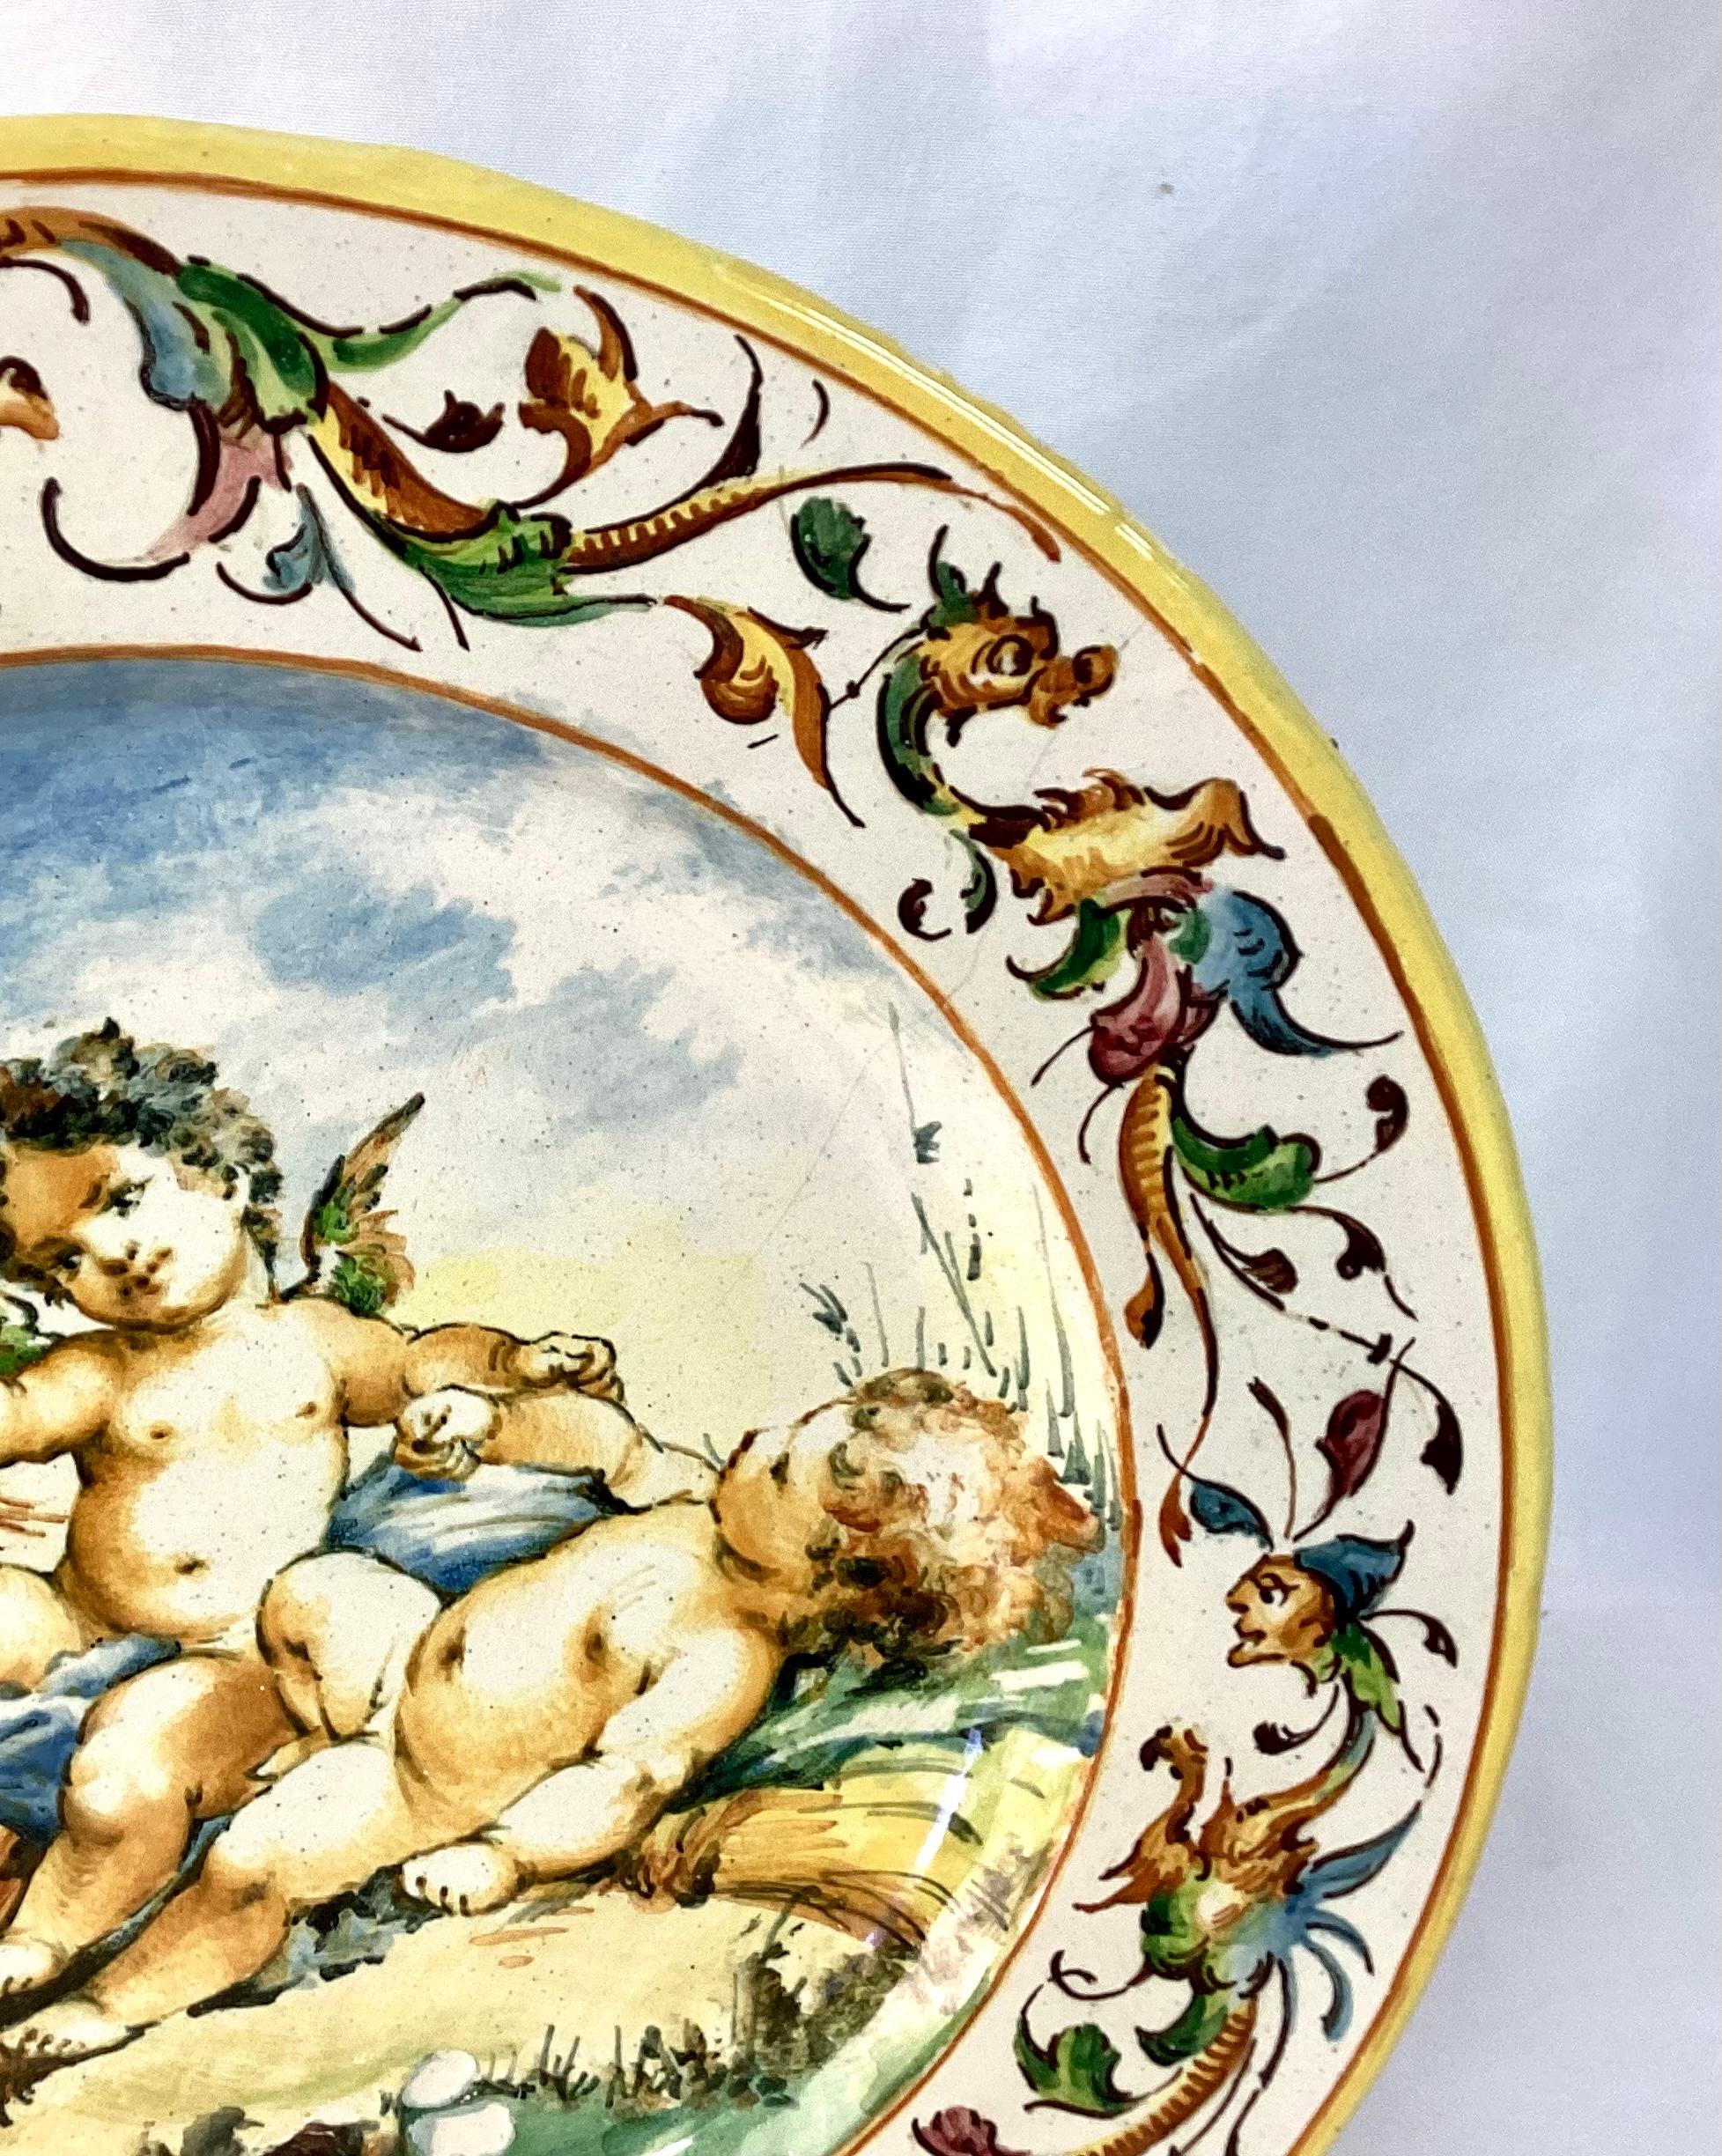 19th century hand painted Italian charger featuring three cherubs interacting with another lying on a bed of wheat stalks under a scenic skyscape. Beautiful yellow, blue and green color palette.